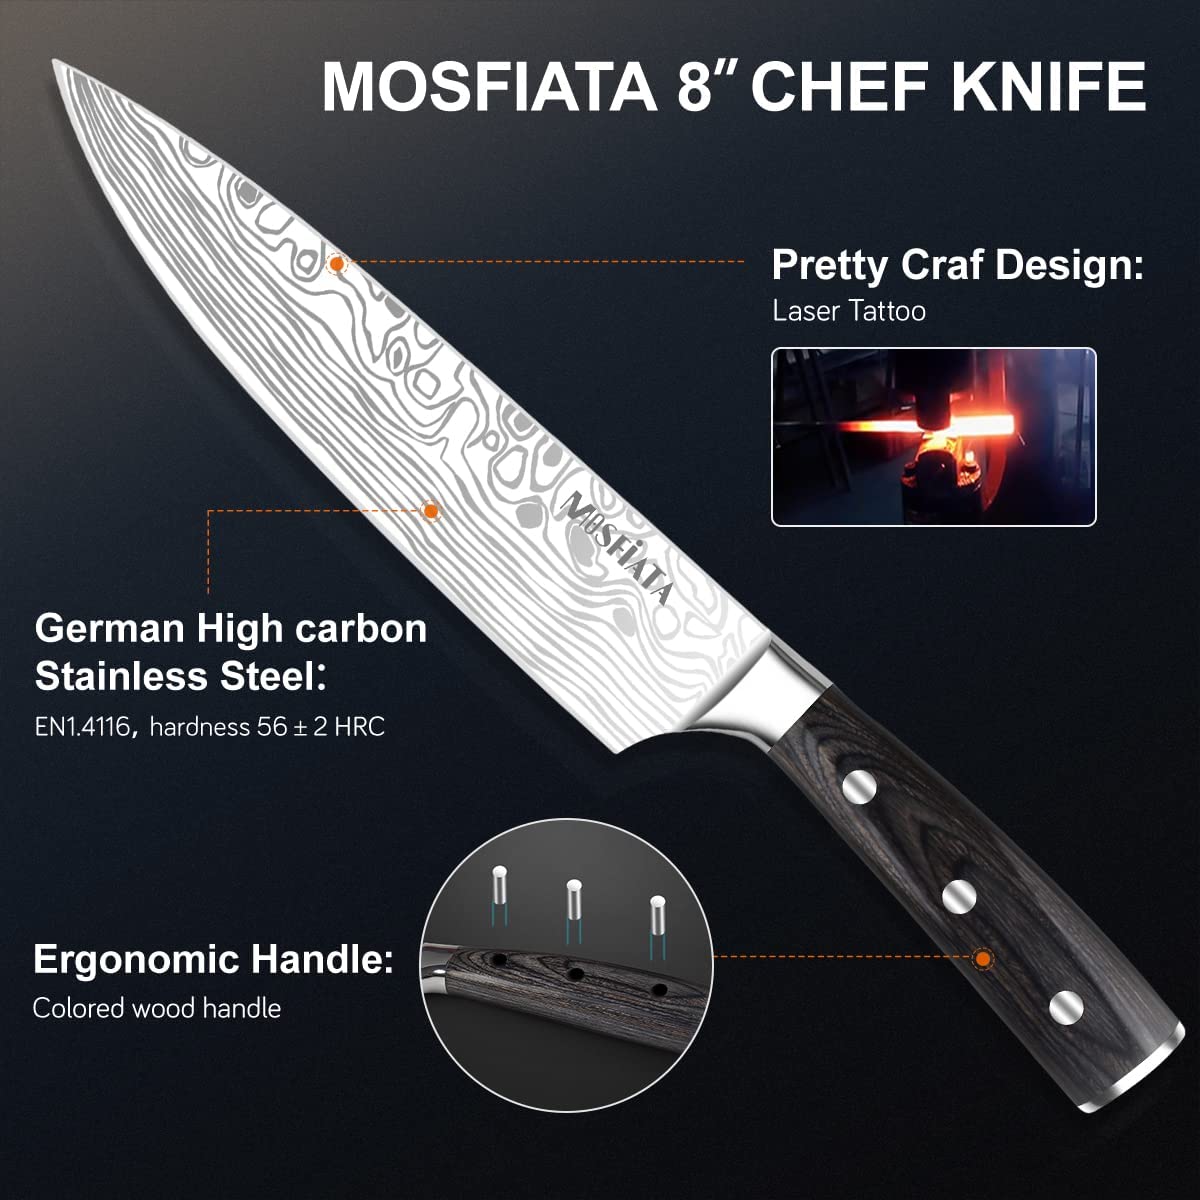 MOSFiATA Chef Knife, Ultra Sharp Kitchen Knife 8 inch, Premier High Carbon  German EN1. 4116 Stainless Steel, Full Tang Blade Pro Chopping Cooking Knife  with Knife Sharpener Finger Blade Guard Gift Box